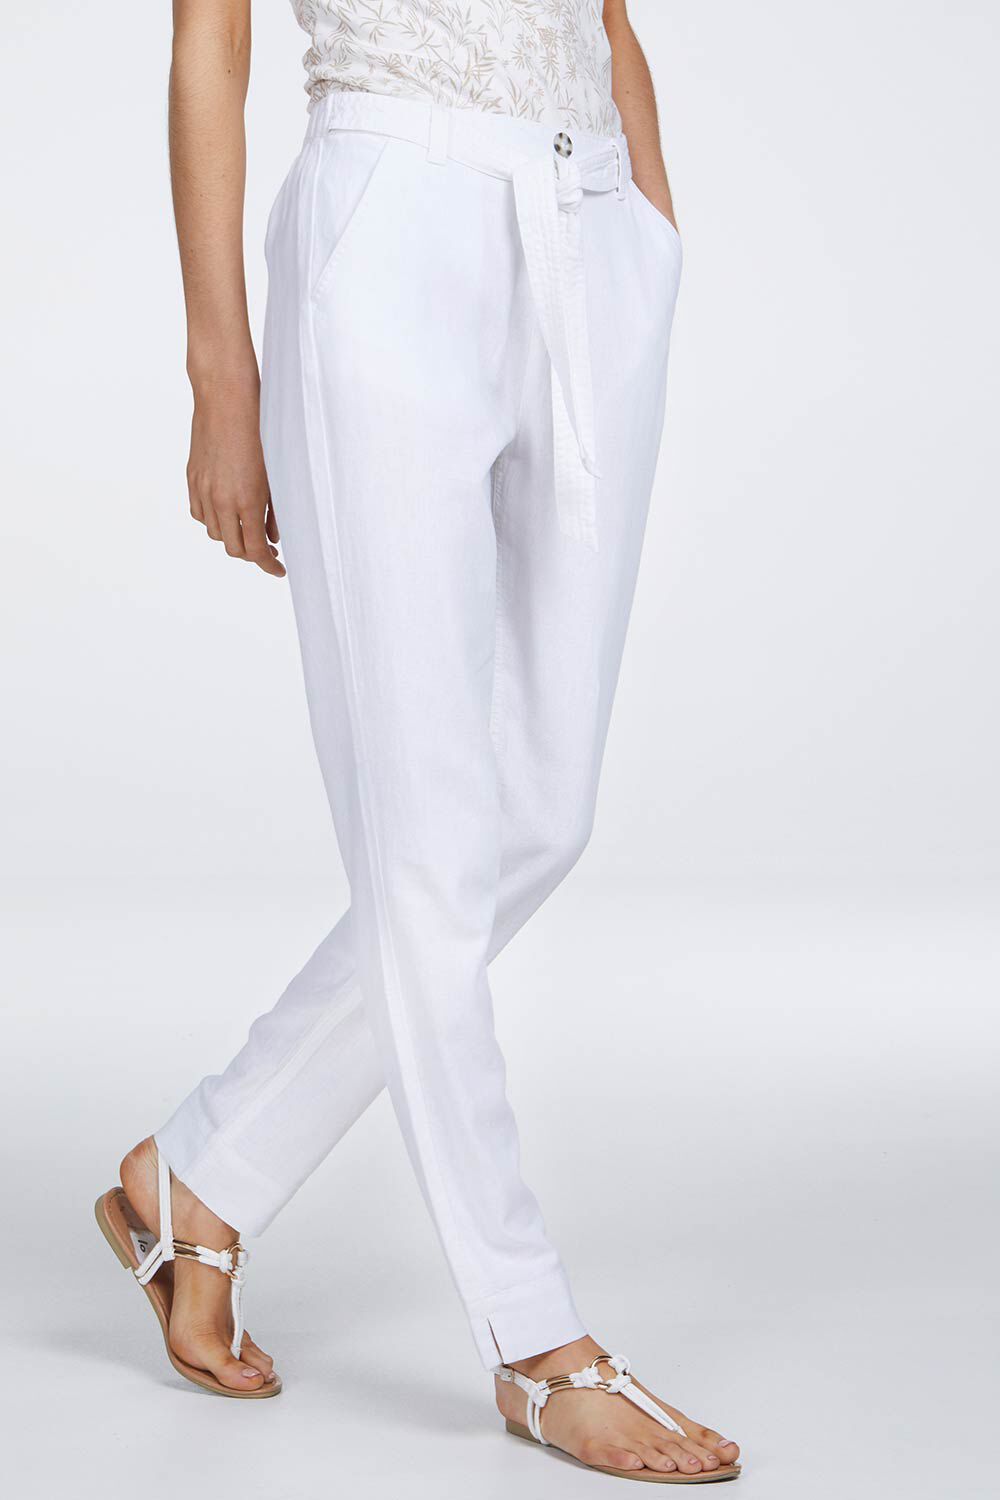 Buy WES Formals Solid Off White Slim Tapered Fit Trousers from Westside